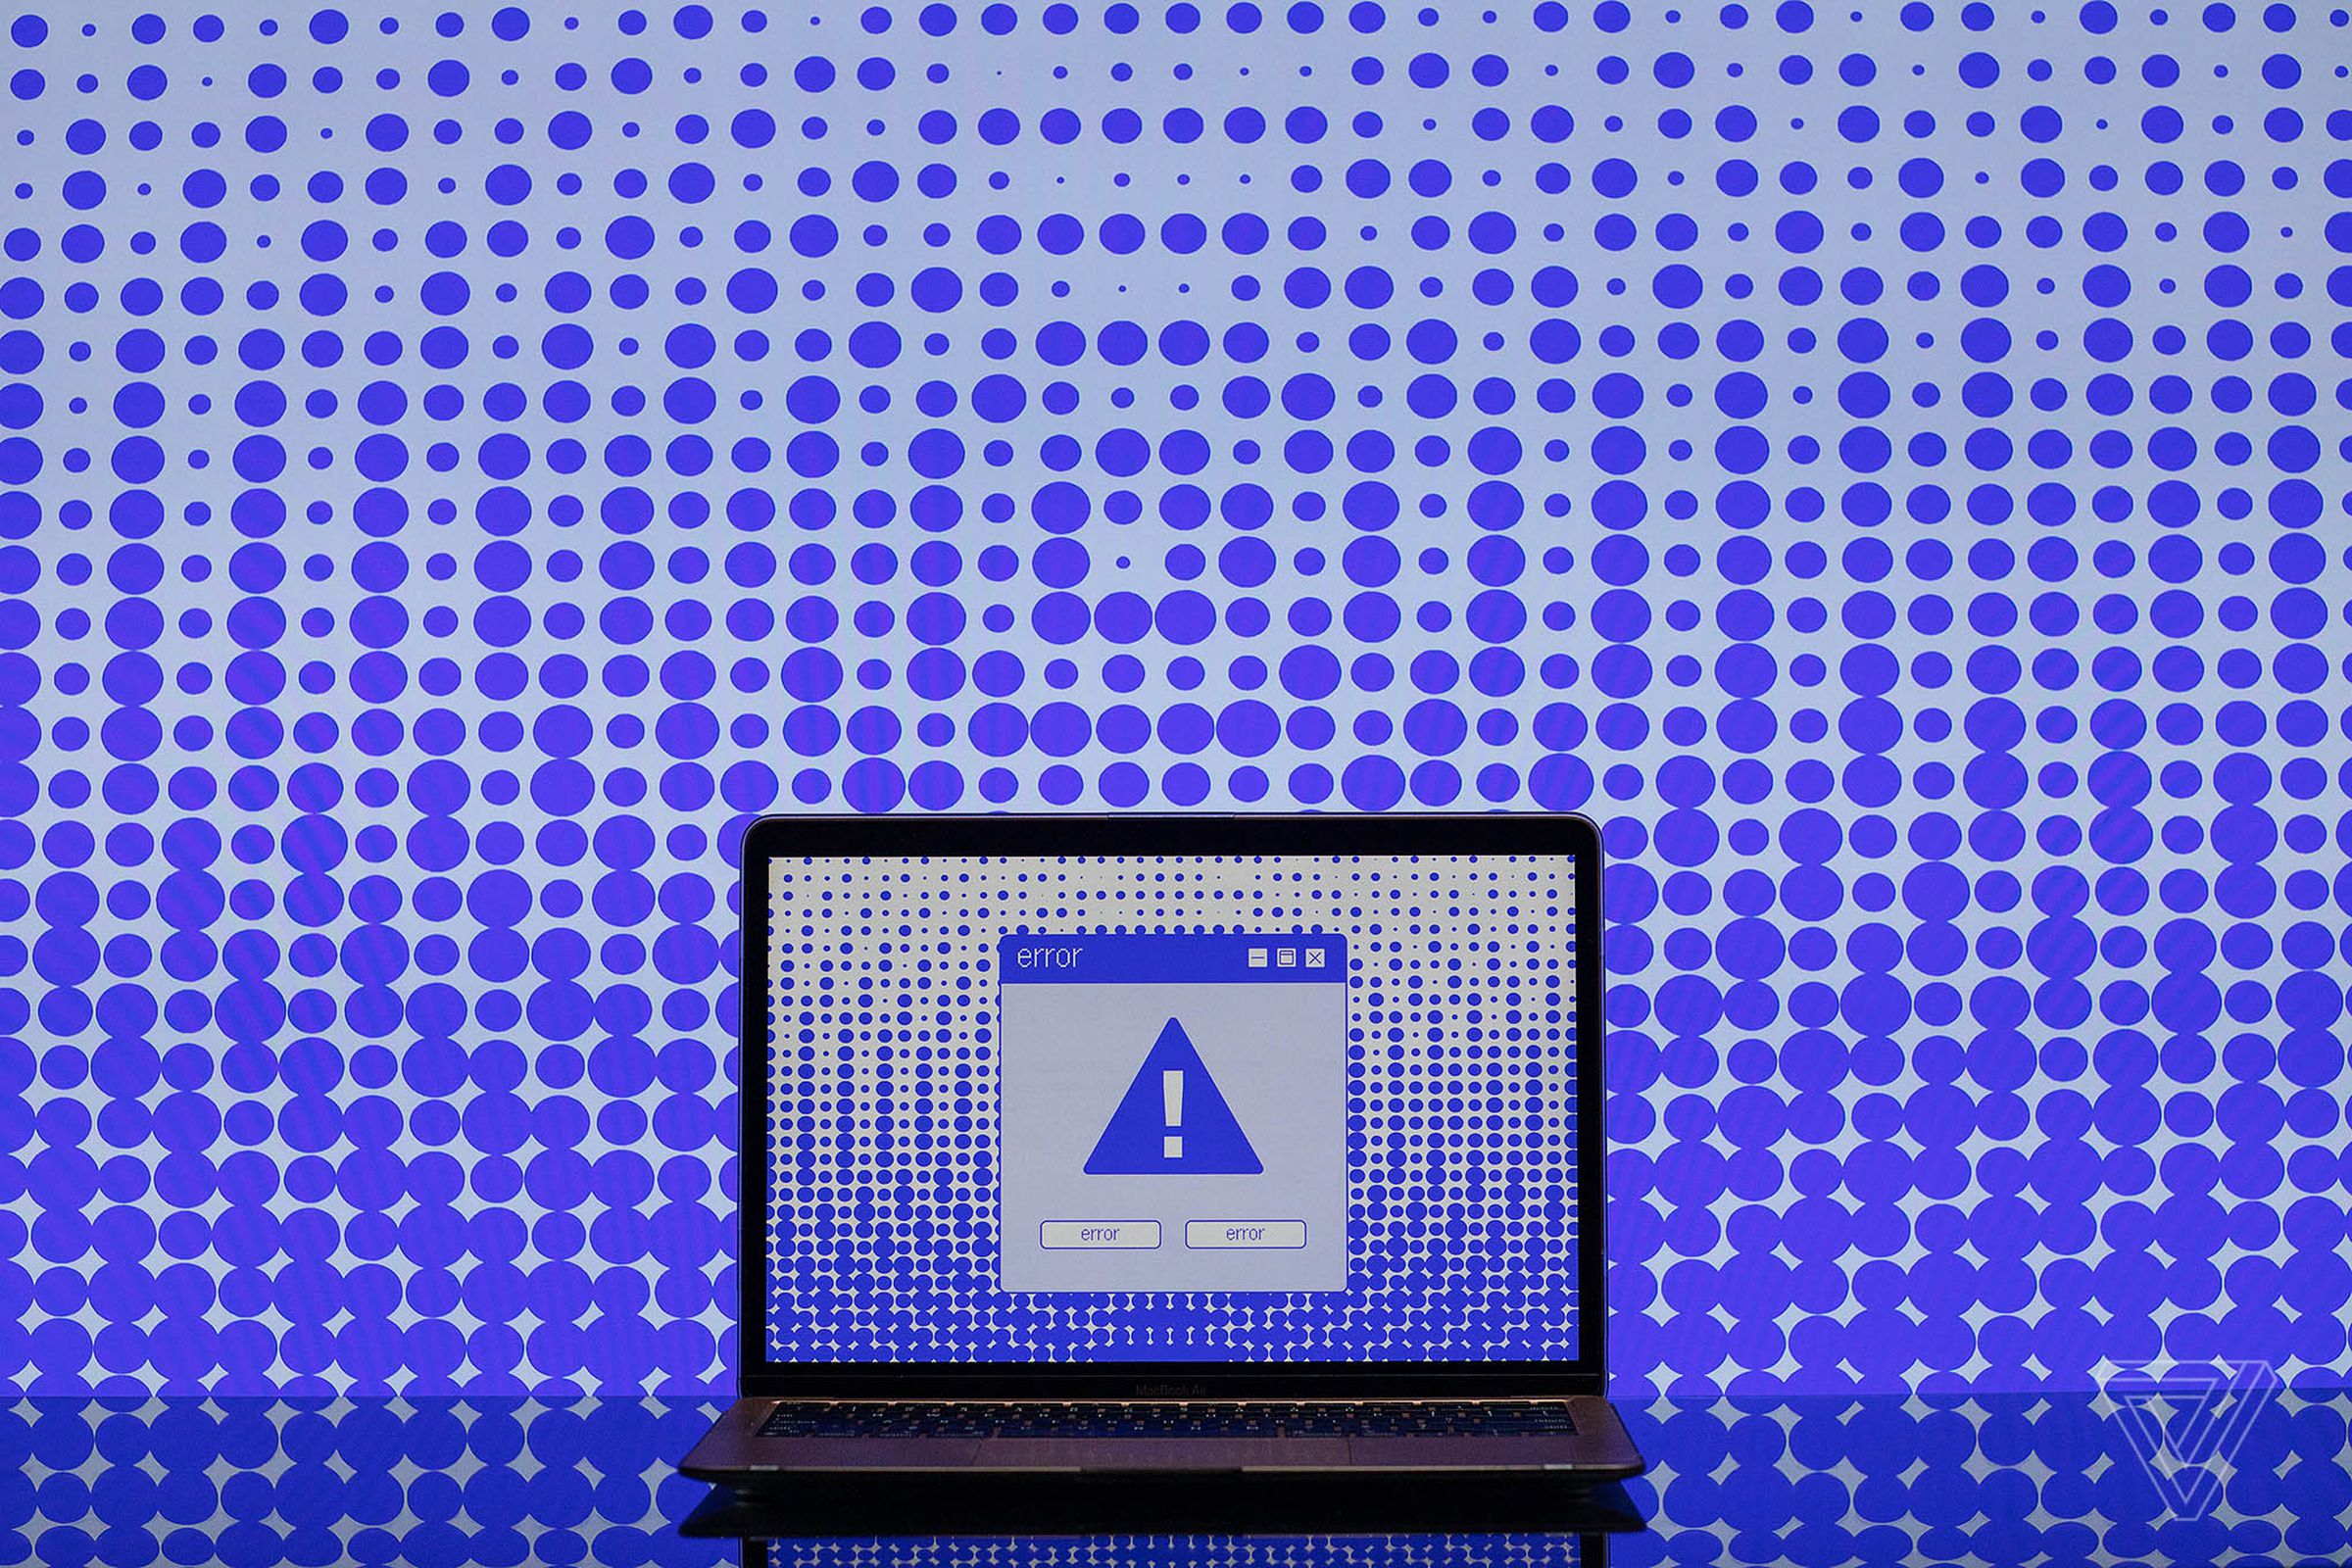 Illustration of a computer screen with a blue exclamation point on it and an error box.